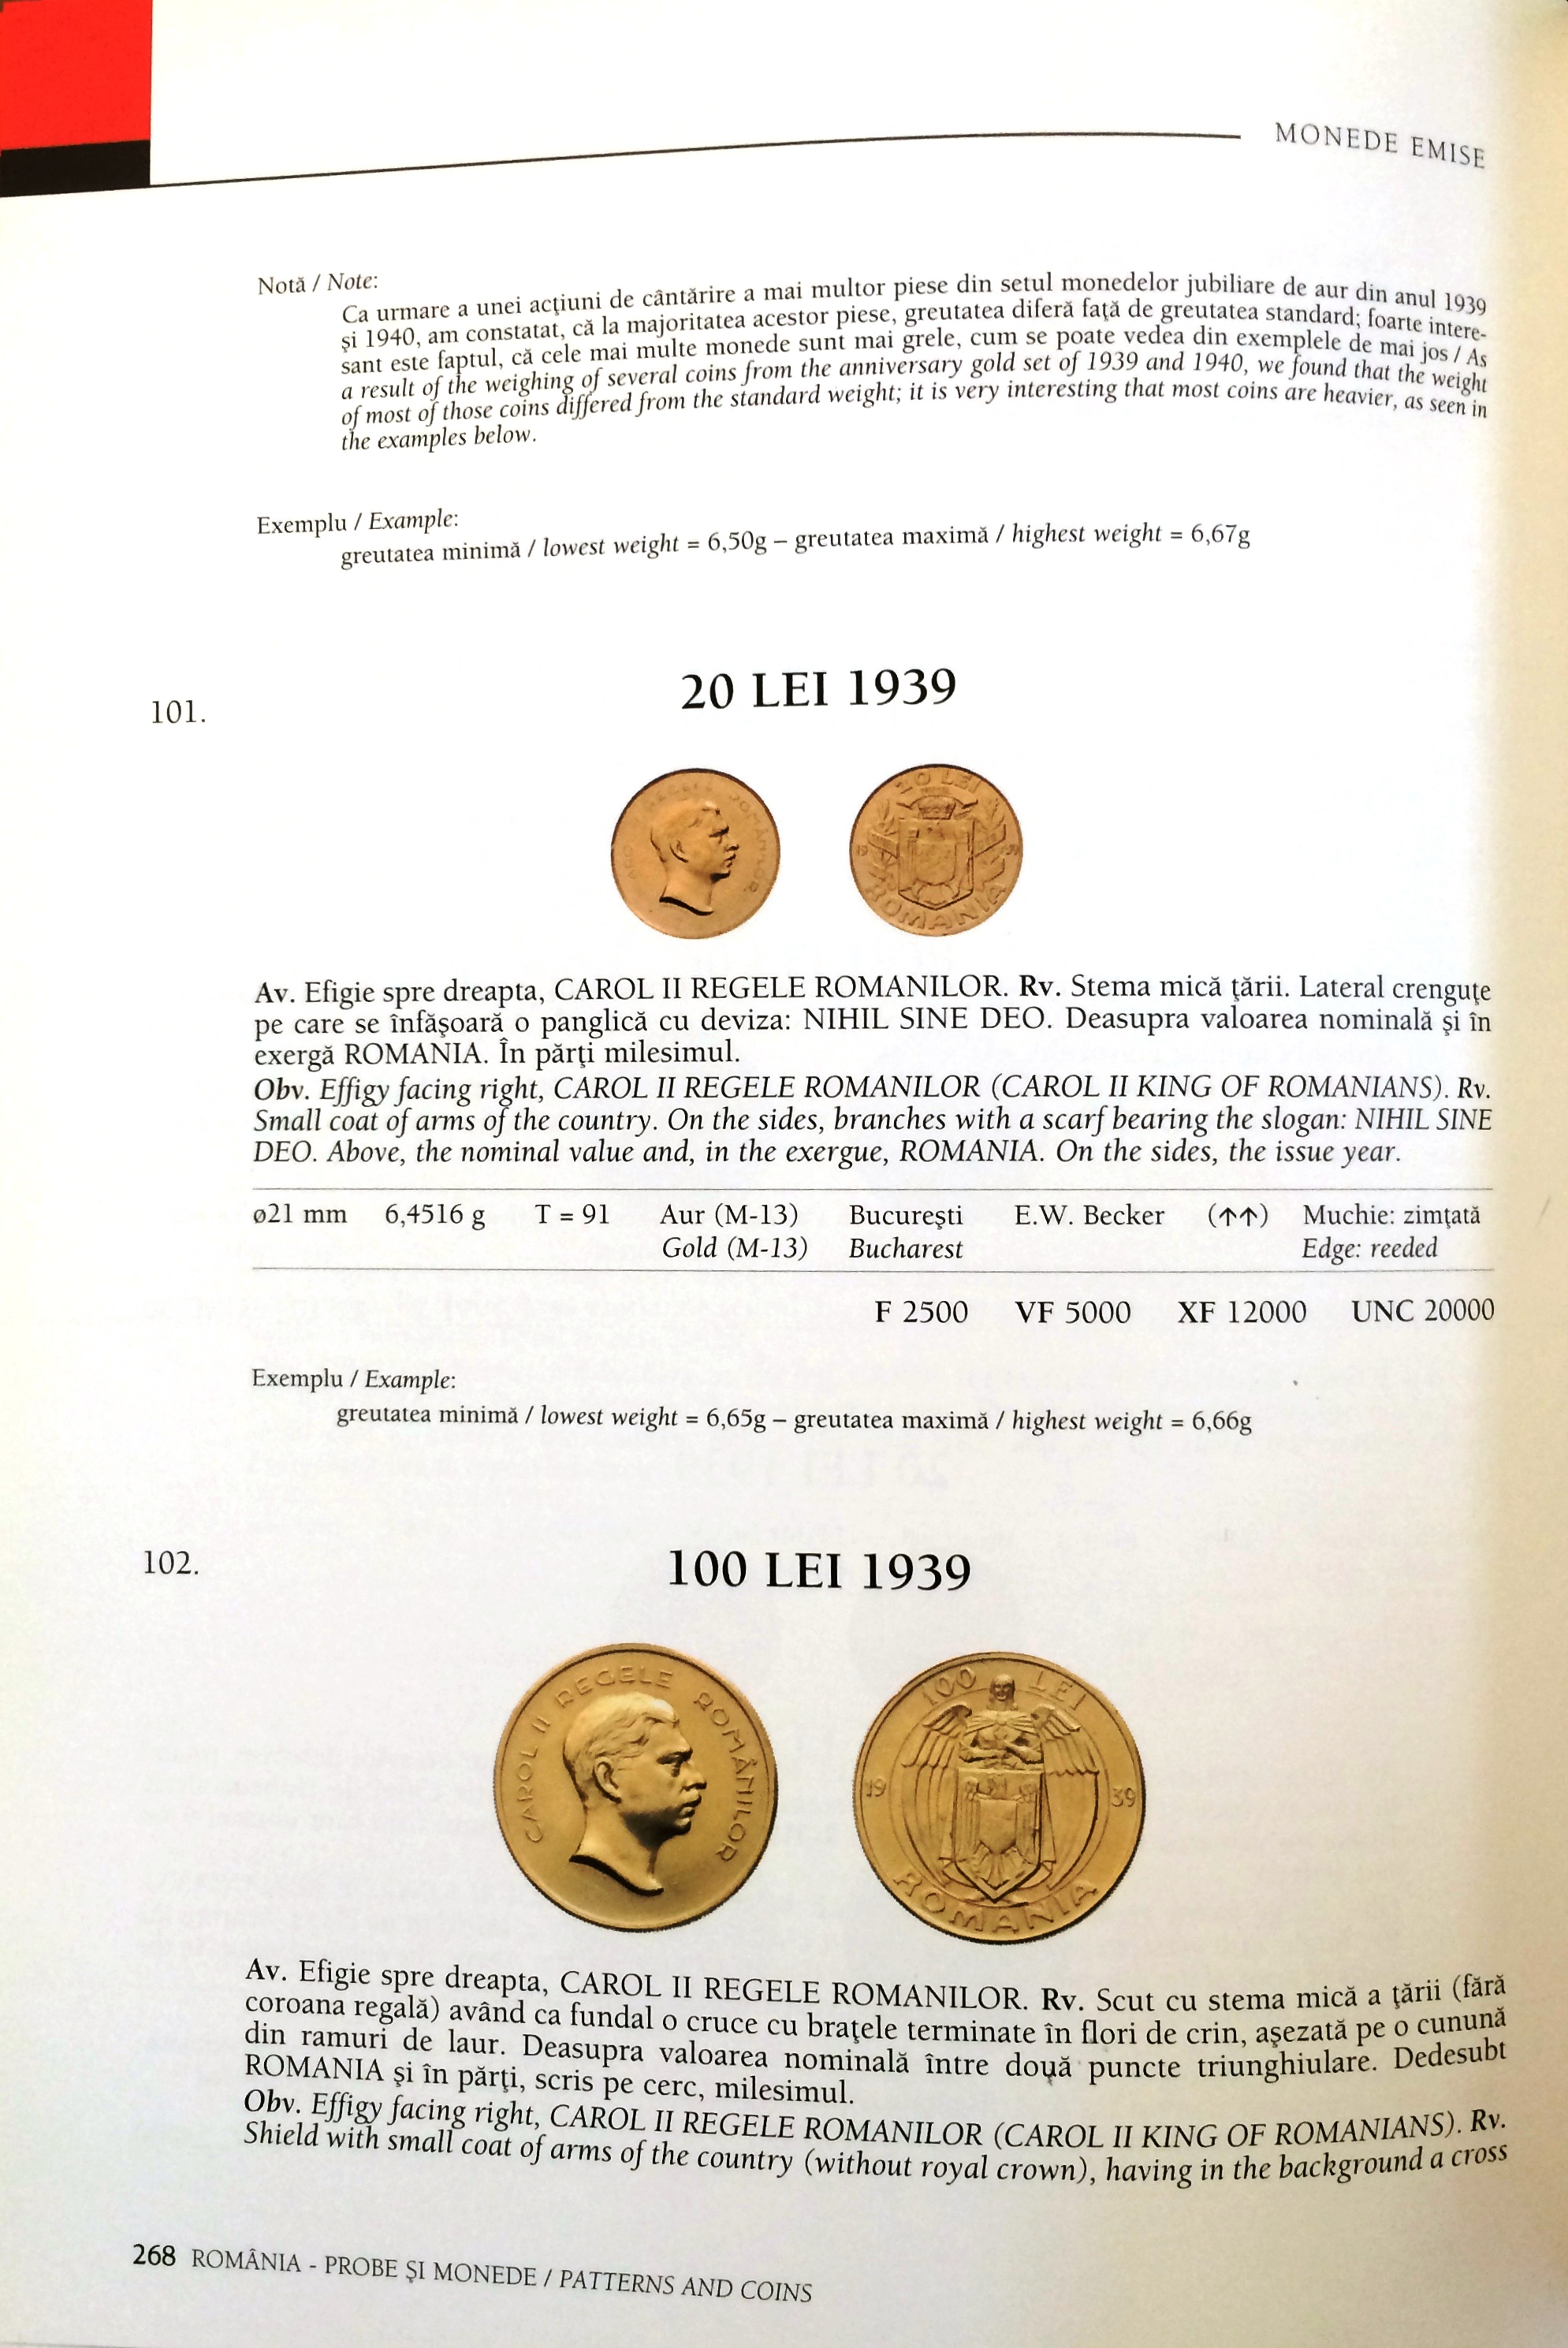 Romania - Designs,Pattern coins and catalogue of Issued coins - Image 3 of 4